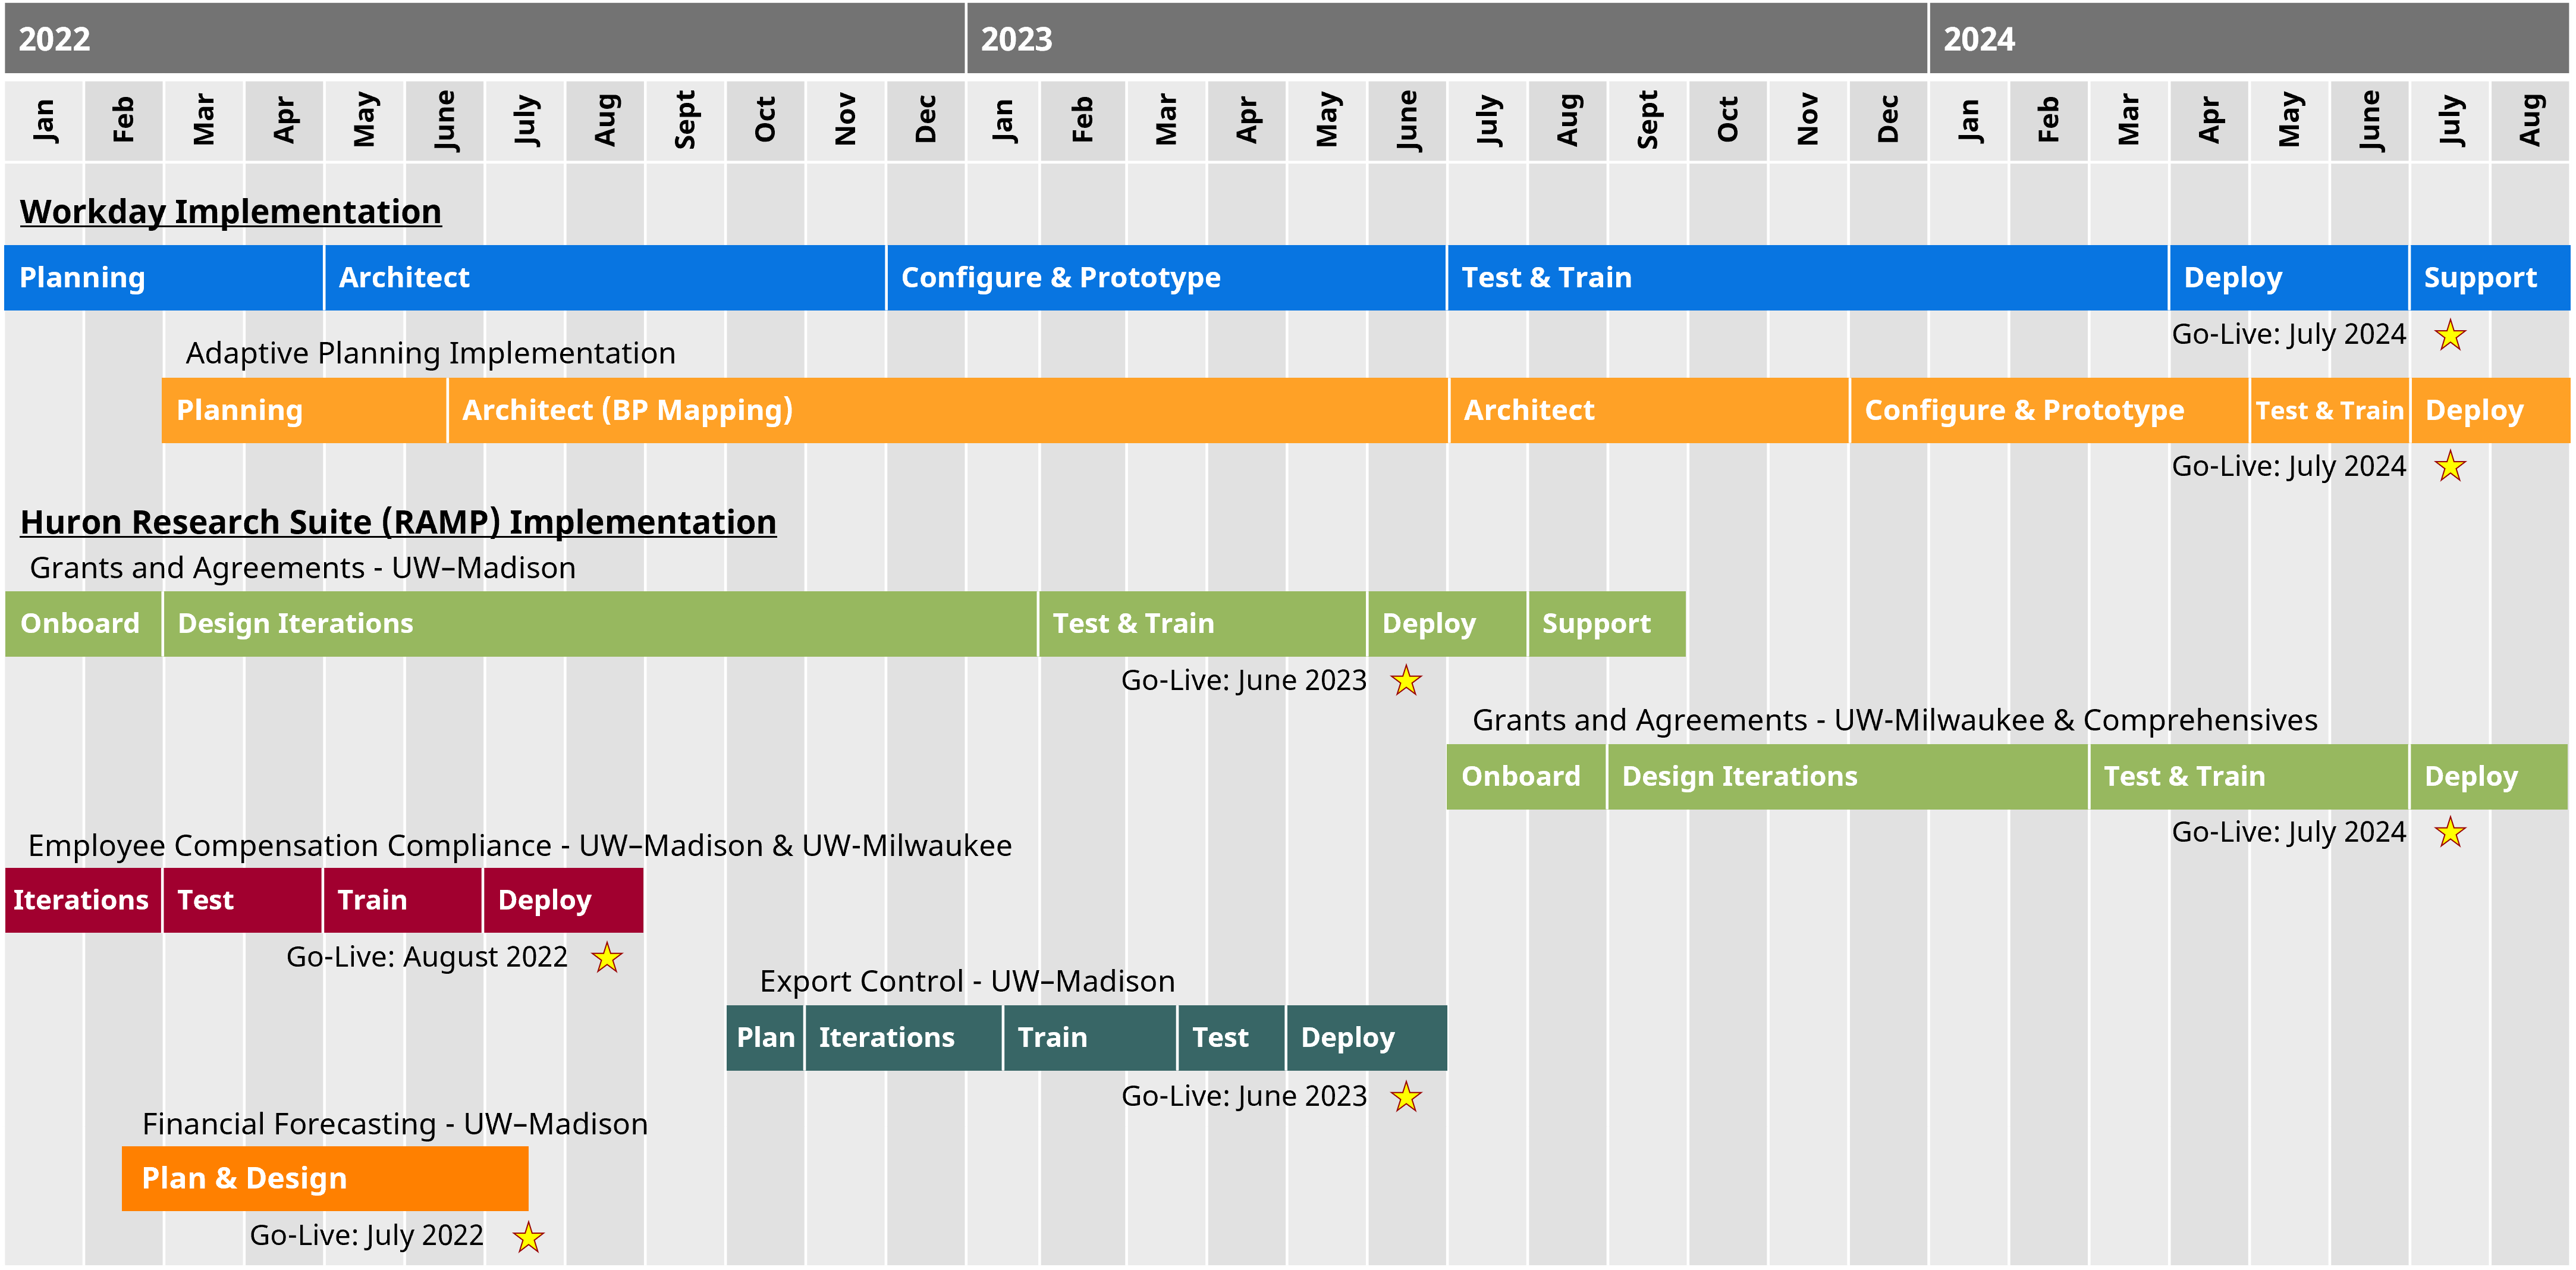 A visual timeline showing the estimated implementation of Huron Research Suite modules across the UW System, which are described below.